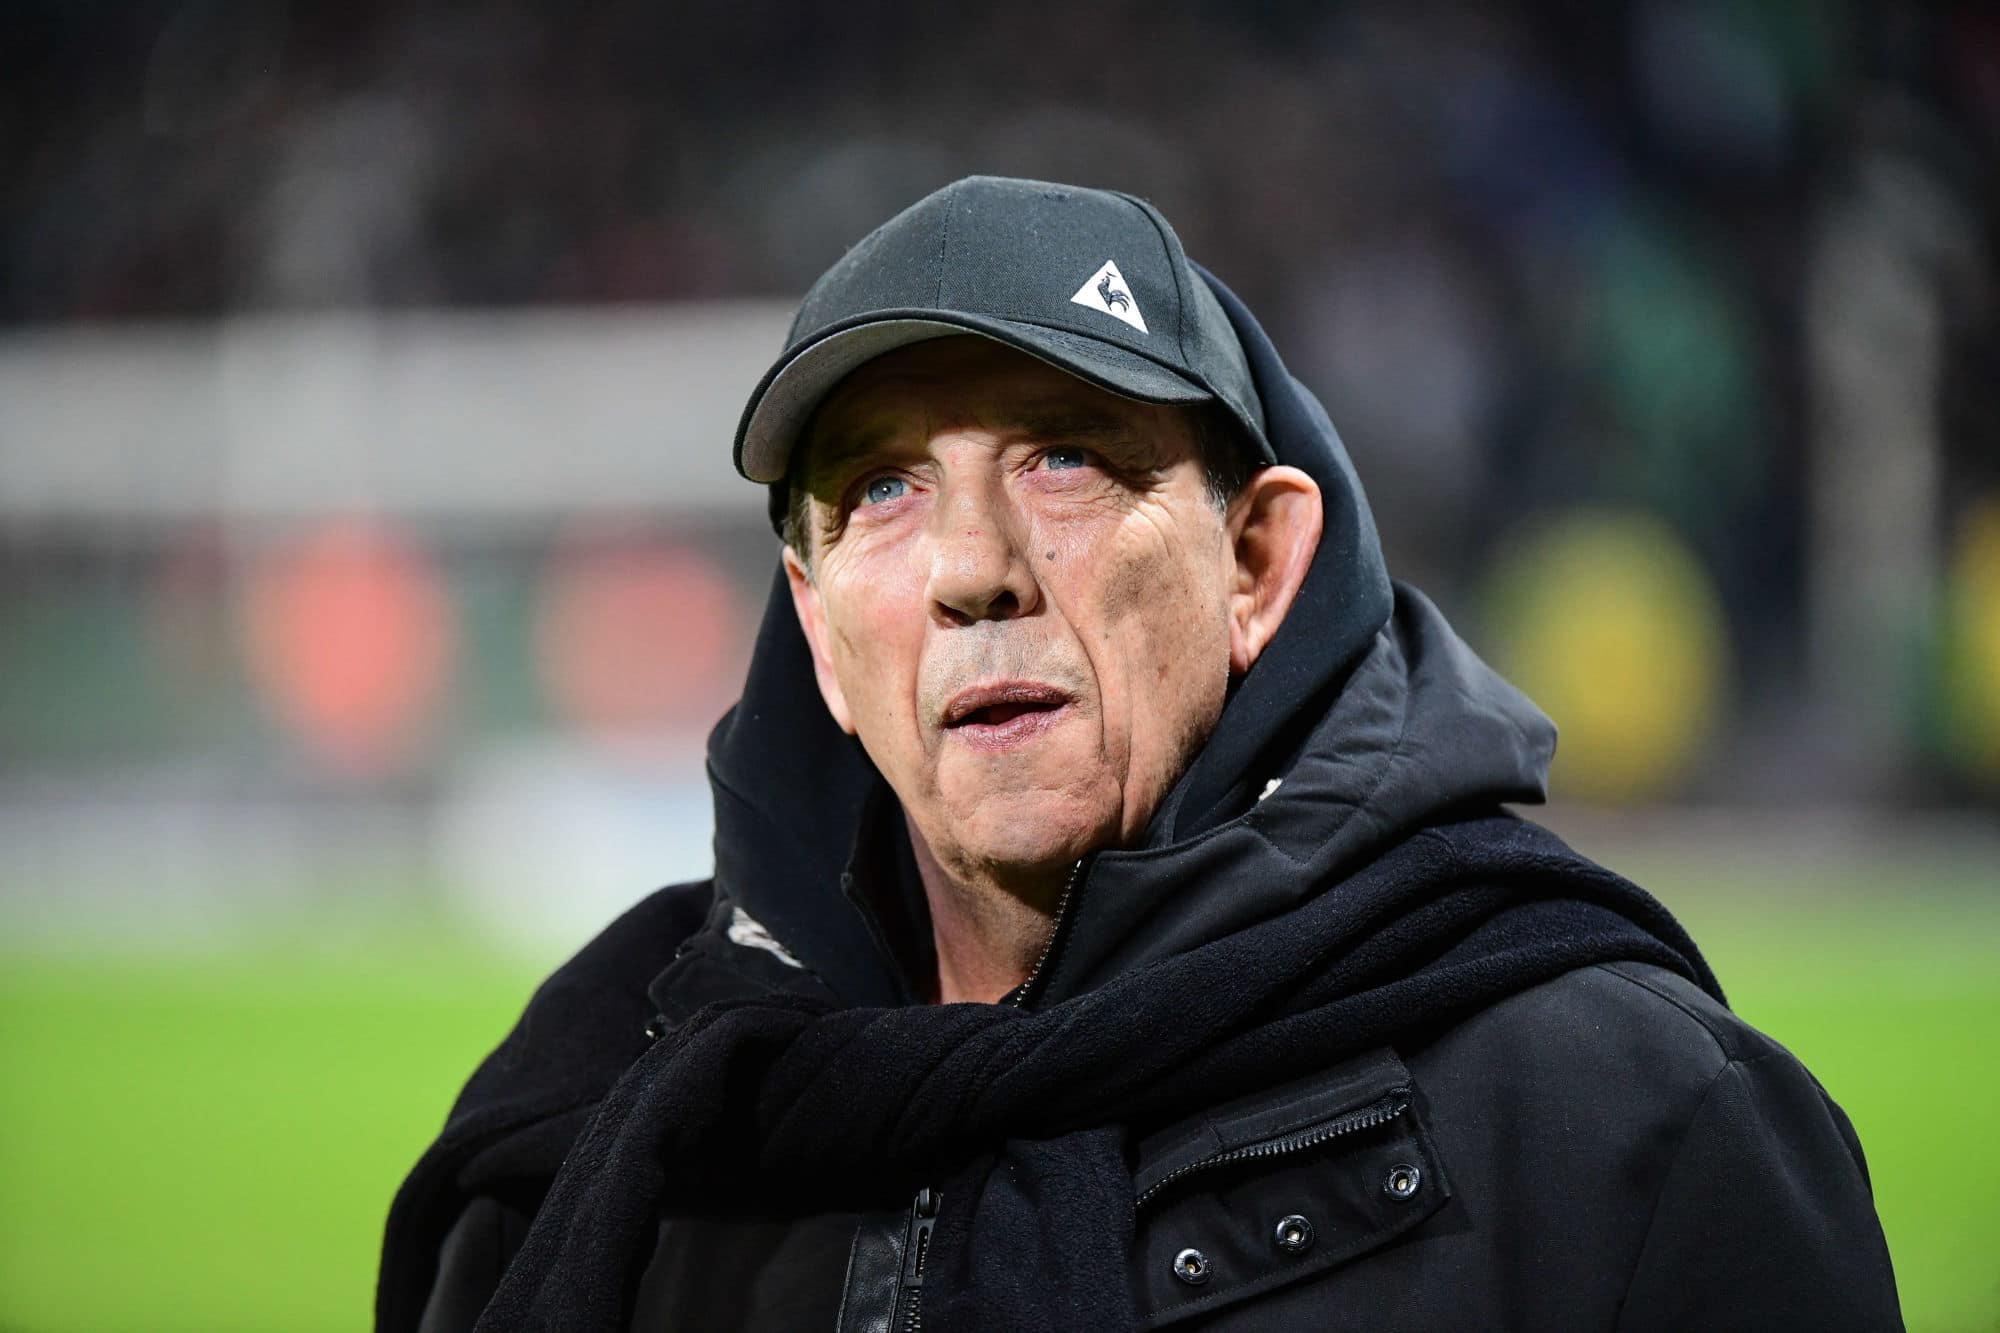 St Etienne coach Jean Louis Gasset during the Ligue 1 match between Saint Etienne and Paris Saint Germain at Stade Geoffroy-Guichard on February 17, 2019 in Saint-Etienne, France. (Photo by Dave Winter/Icon Sport)